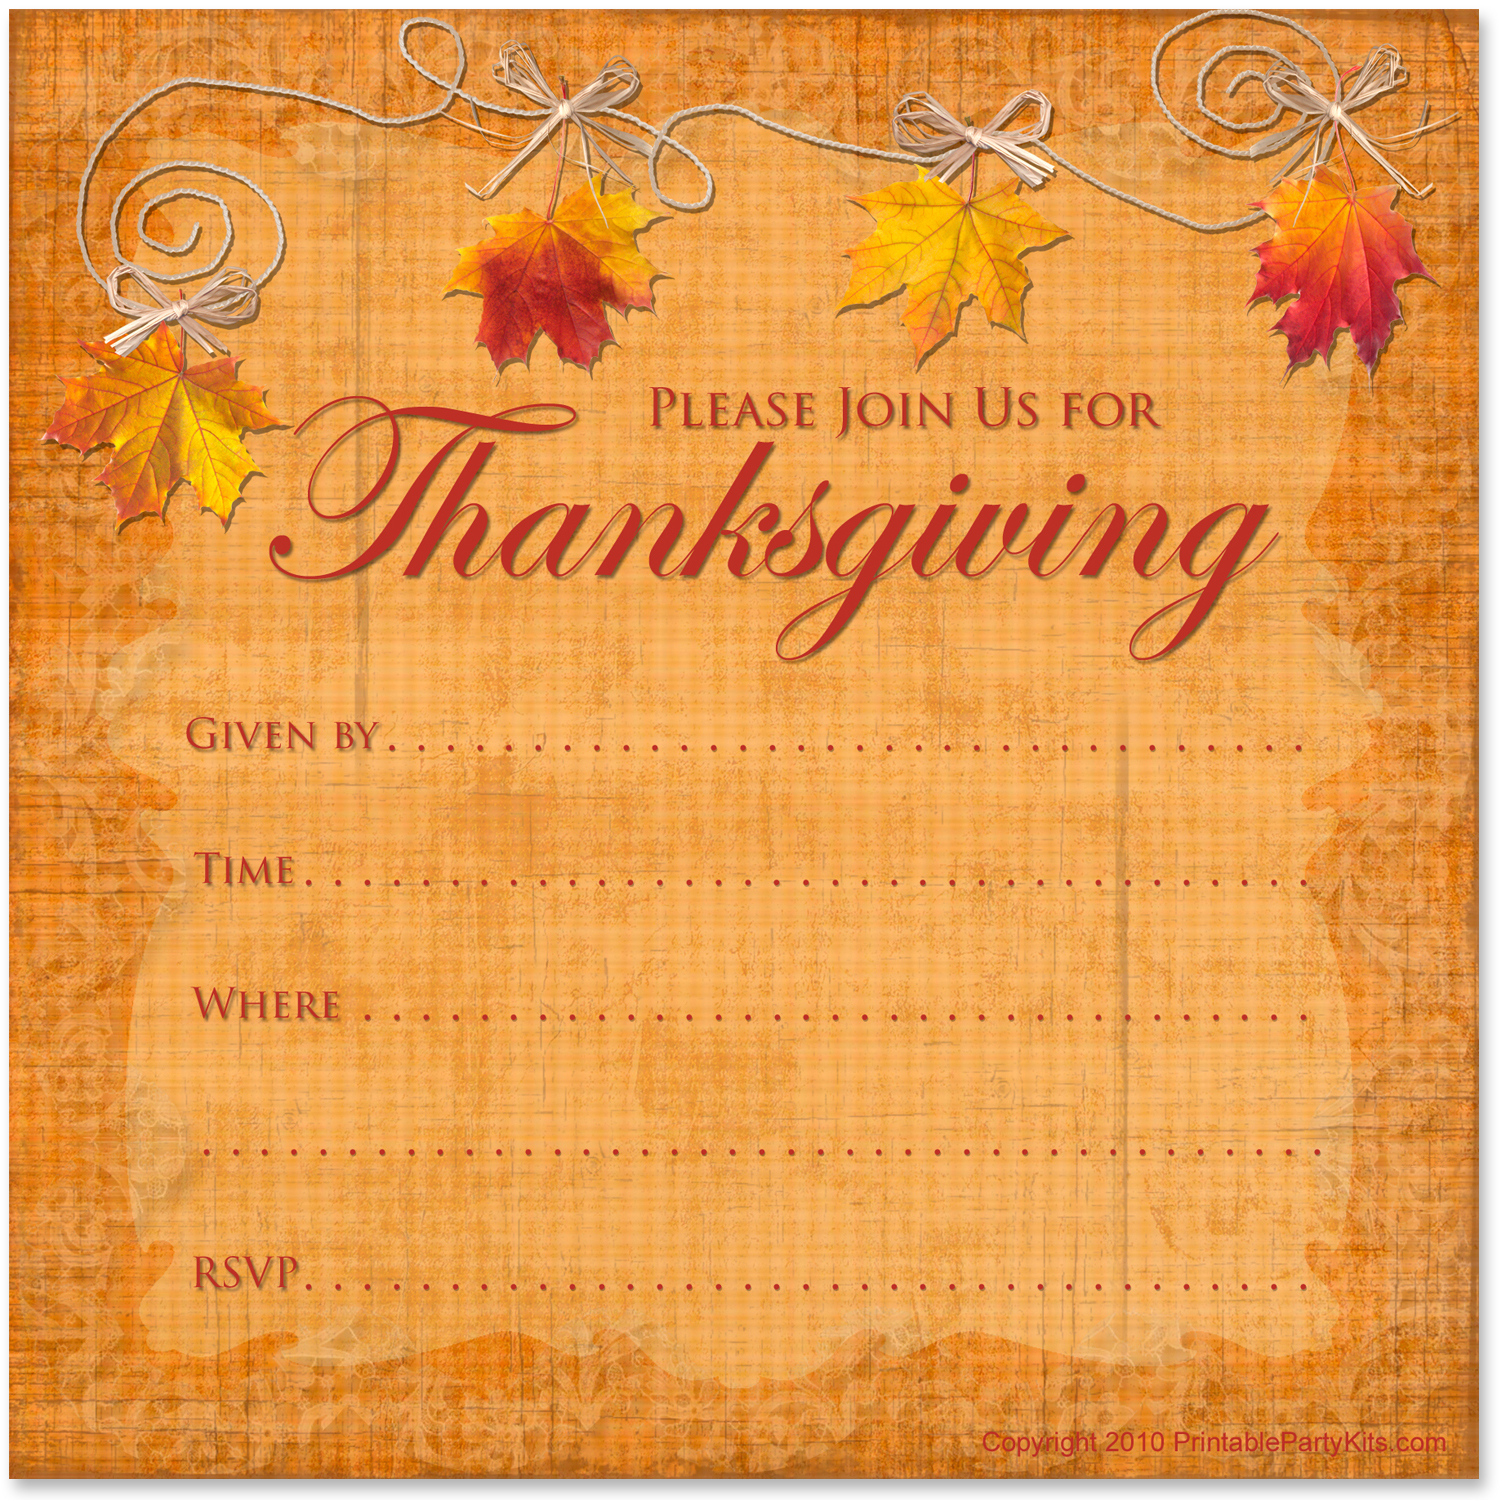 Can&amp;#039;t Find Substitution For Tag [Post.body]--&amp;gt; Printable - Free Printable Thanksgiving Invitations